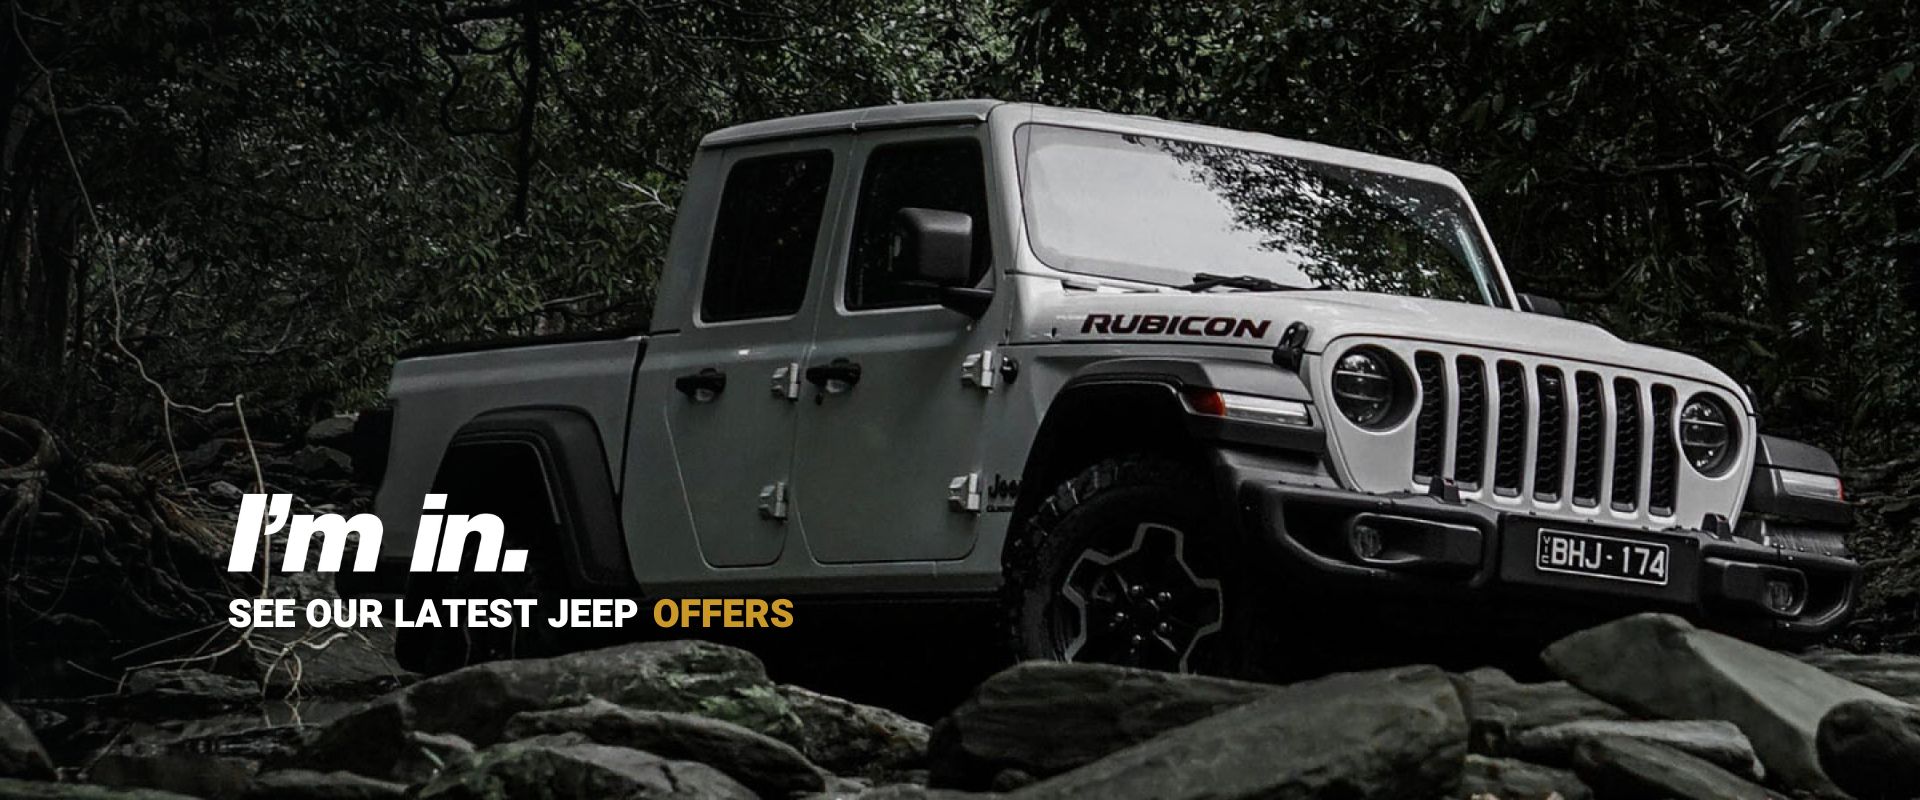 See our latest Jeep Offers